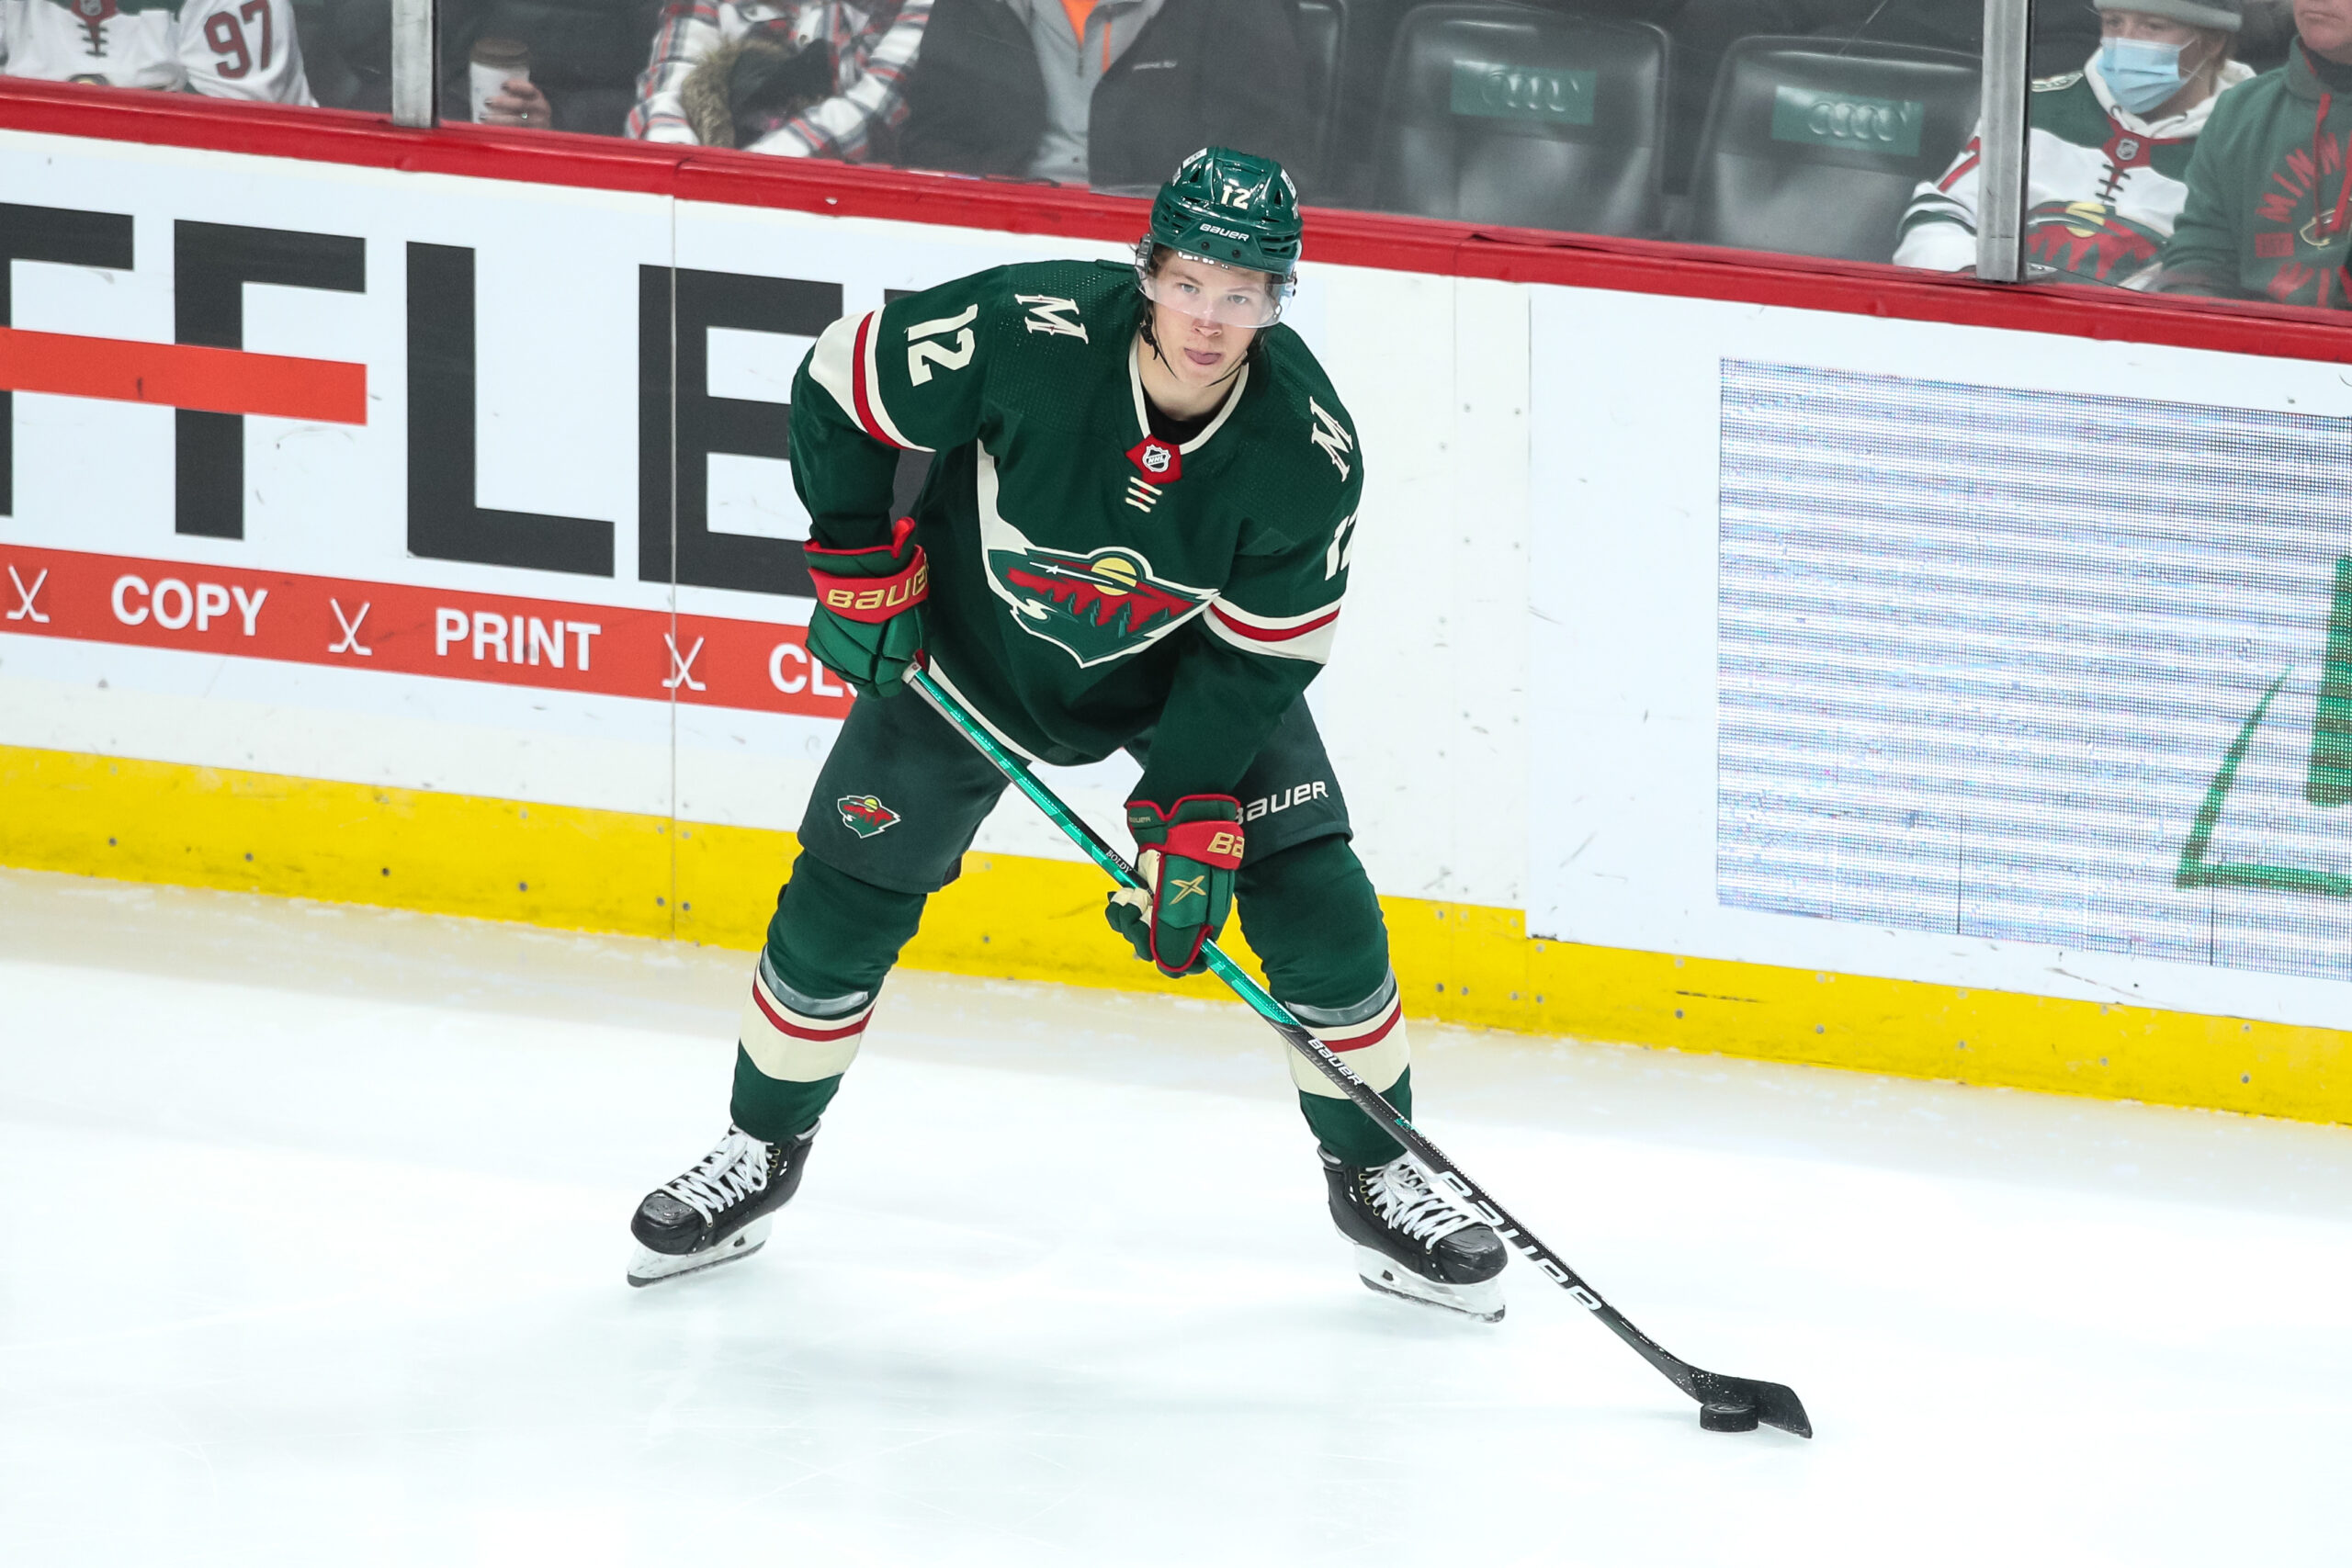 Kaprizov & Boldy could be dynamic duo for the Wild